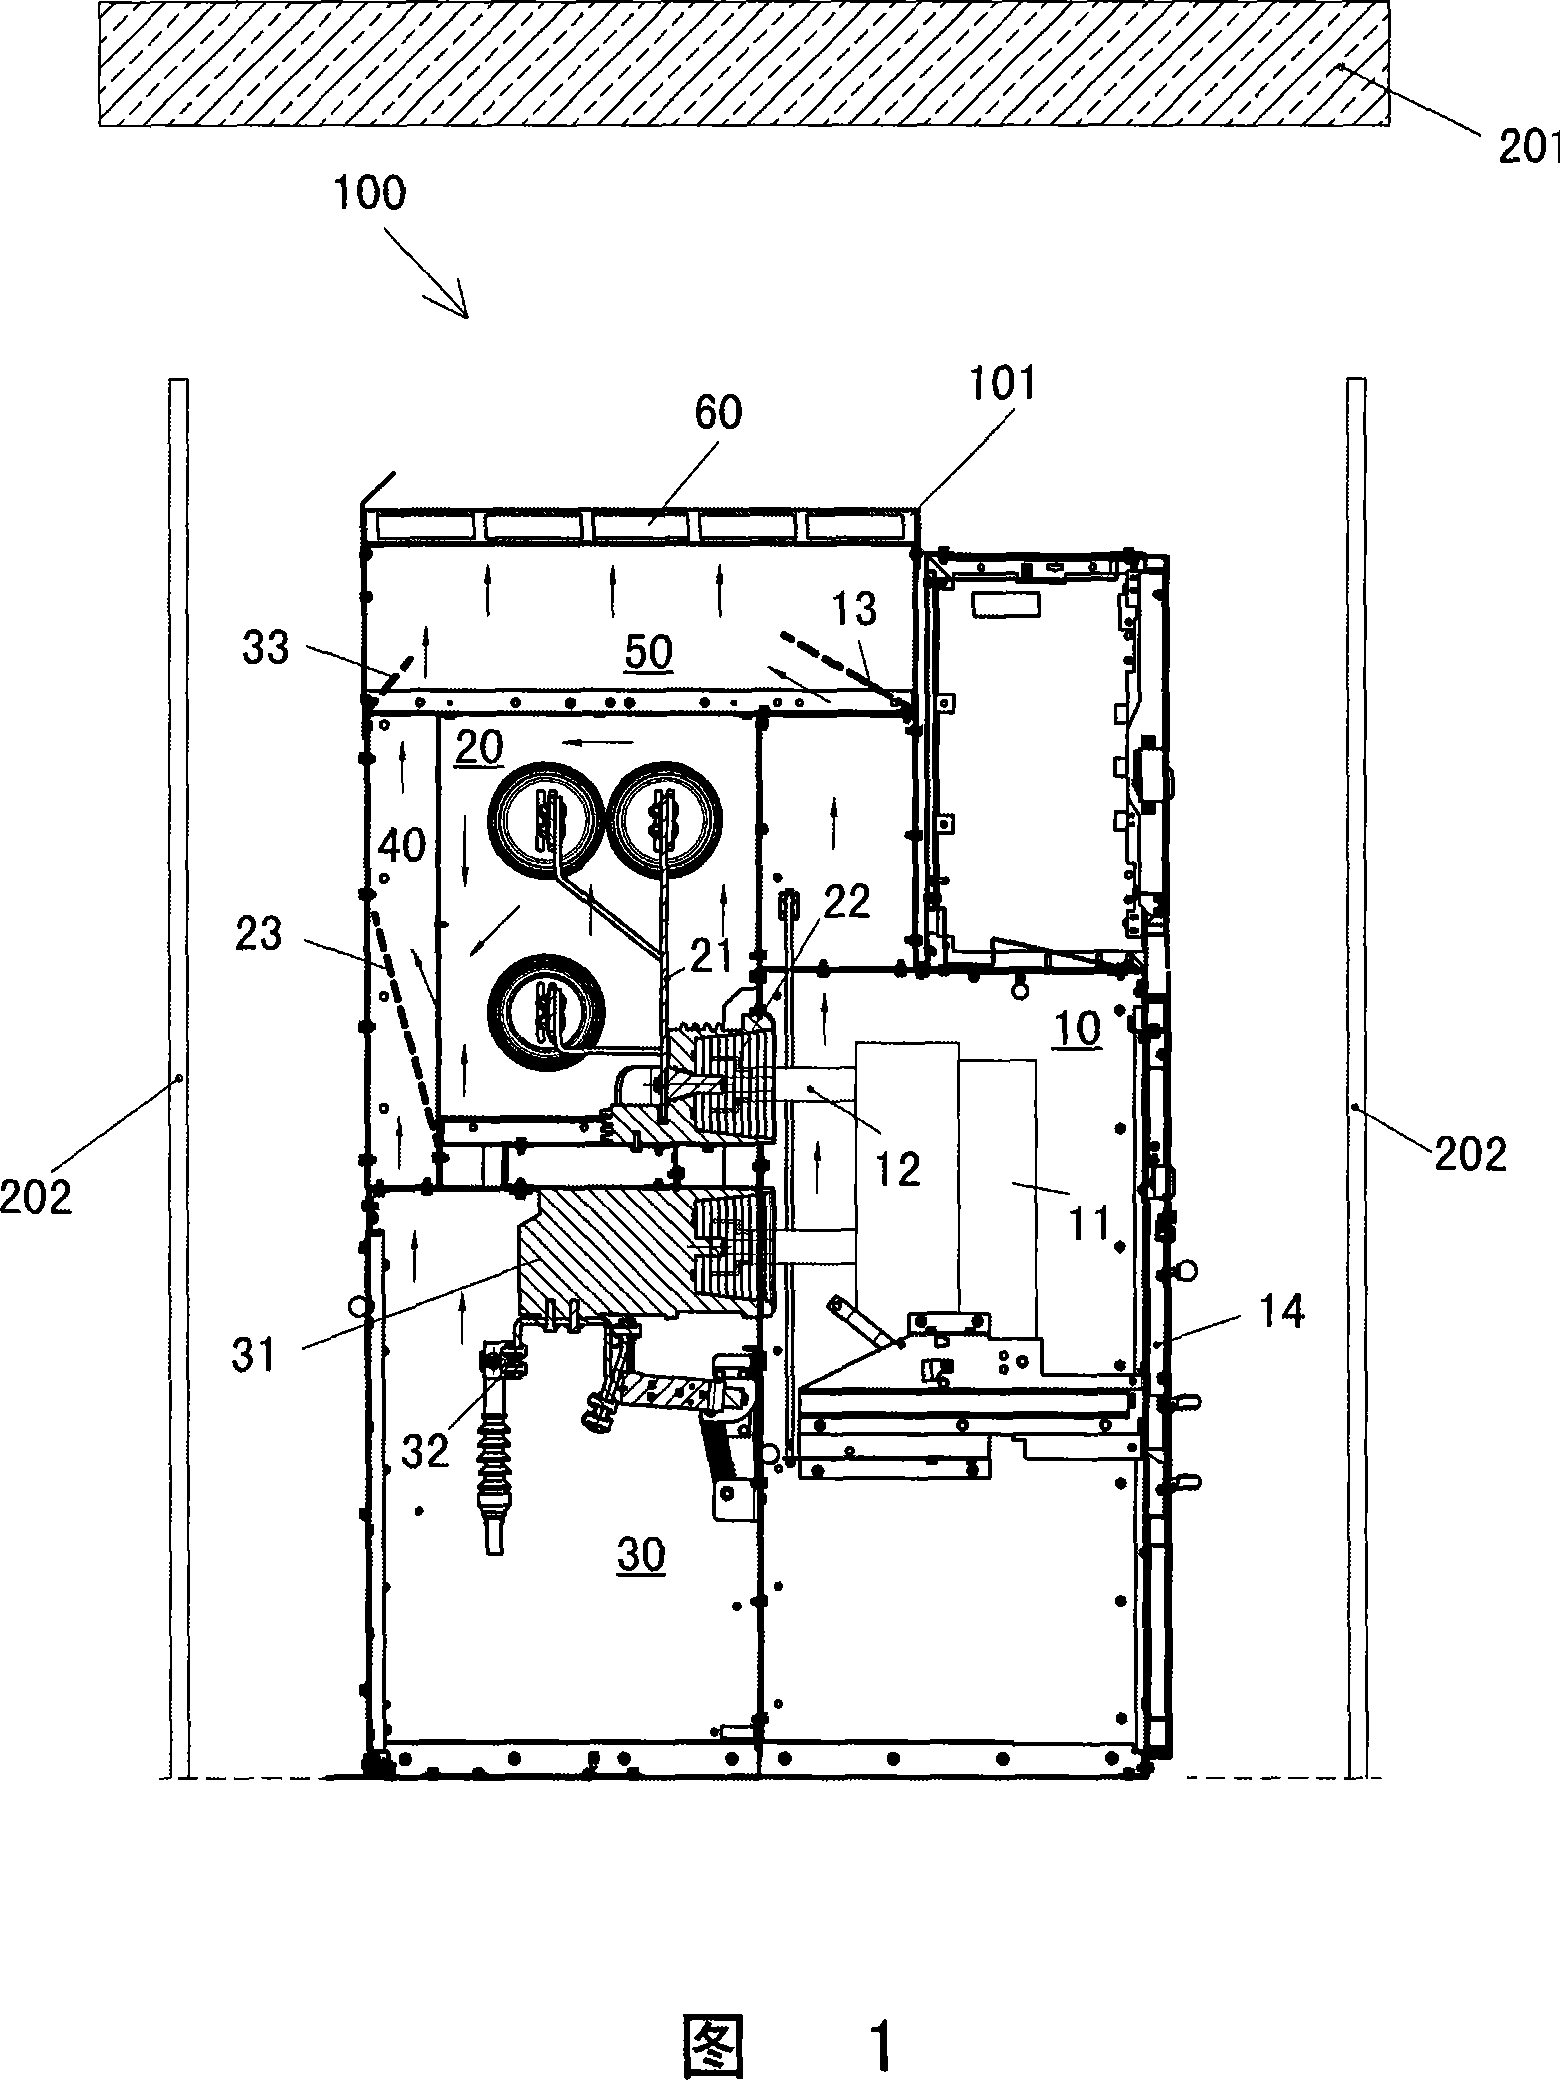 Switch installation with build-in electric arc releasing device